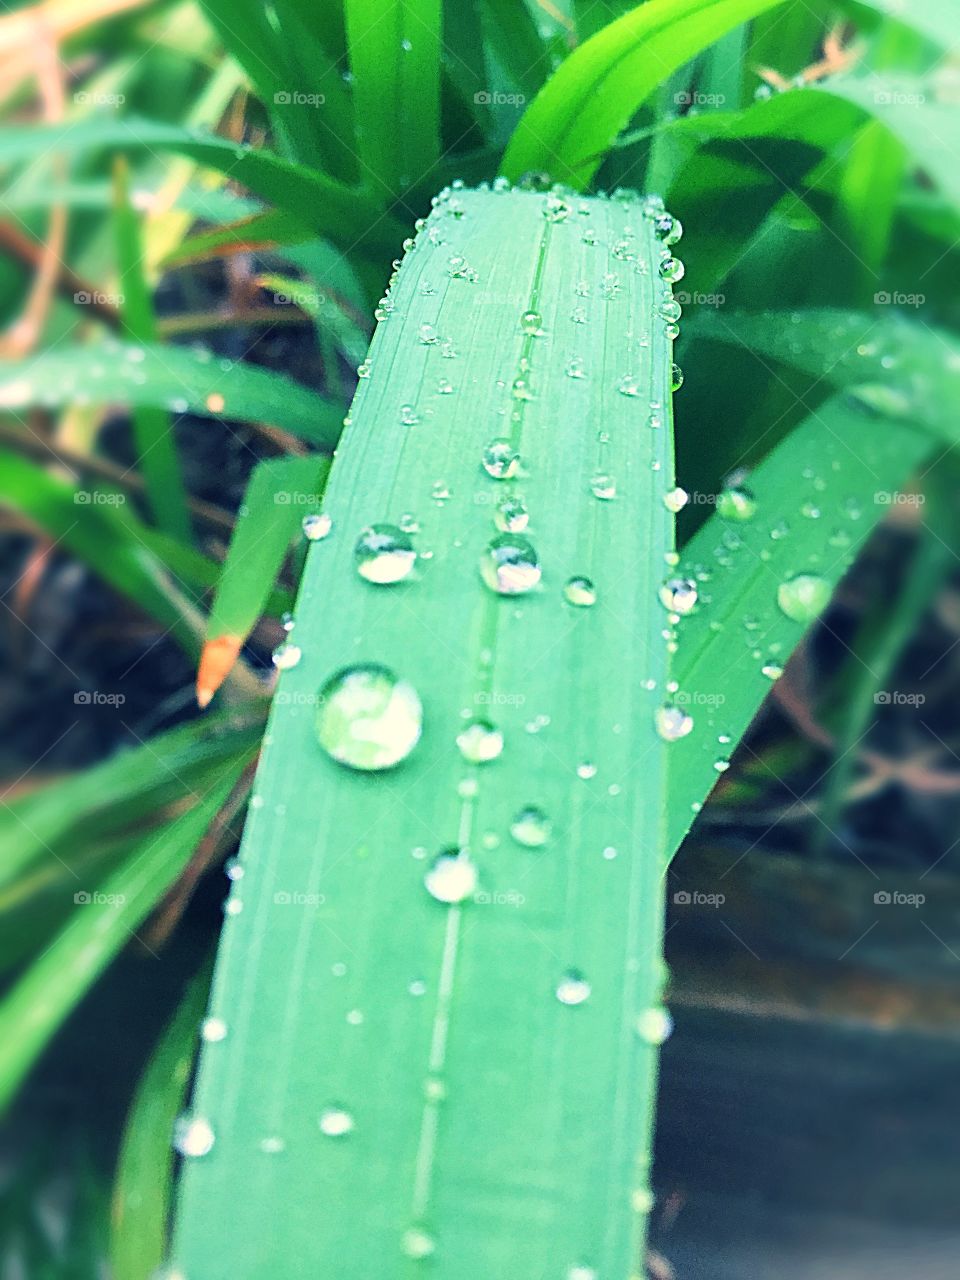 This photo is of a long leave with dew drops on it. The photo has more dew drop covered leaves in the background.